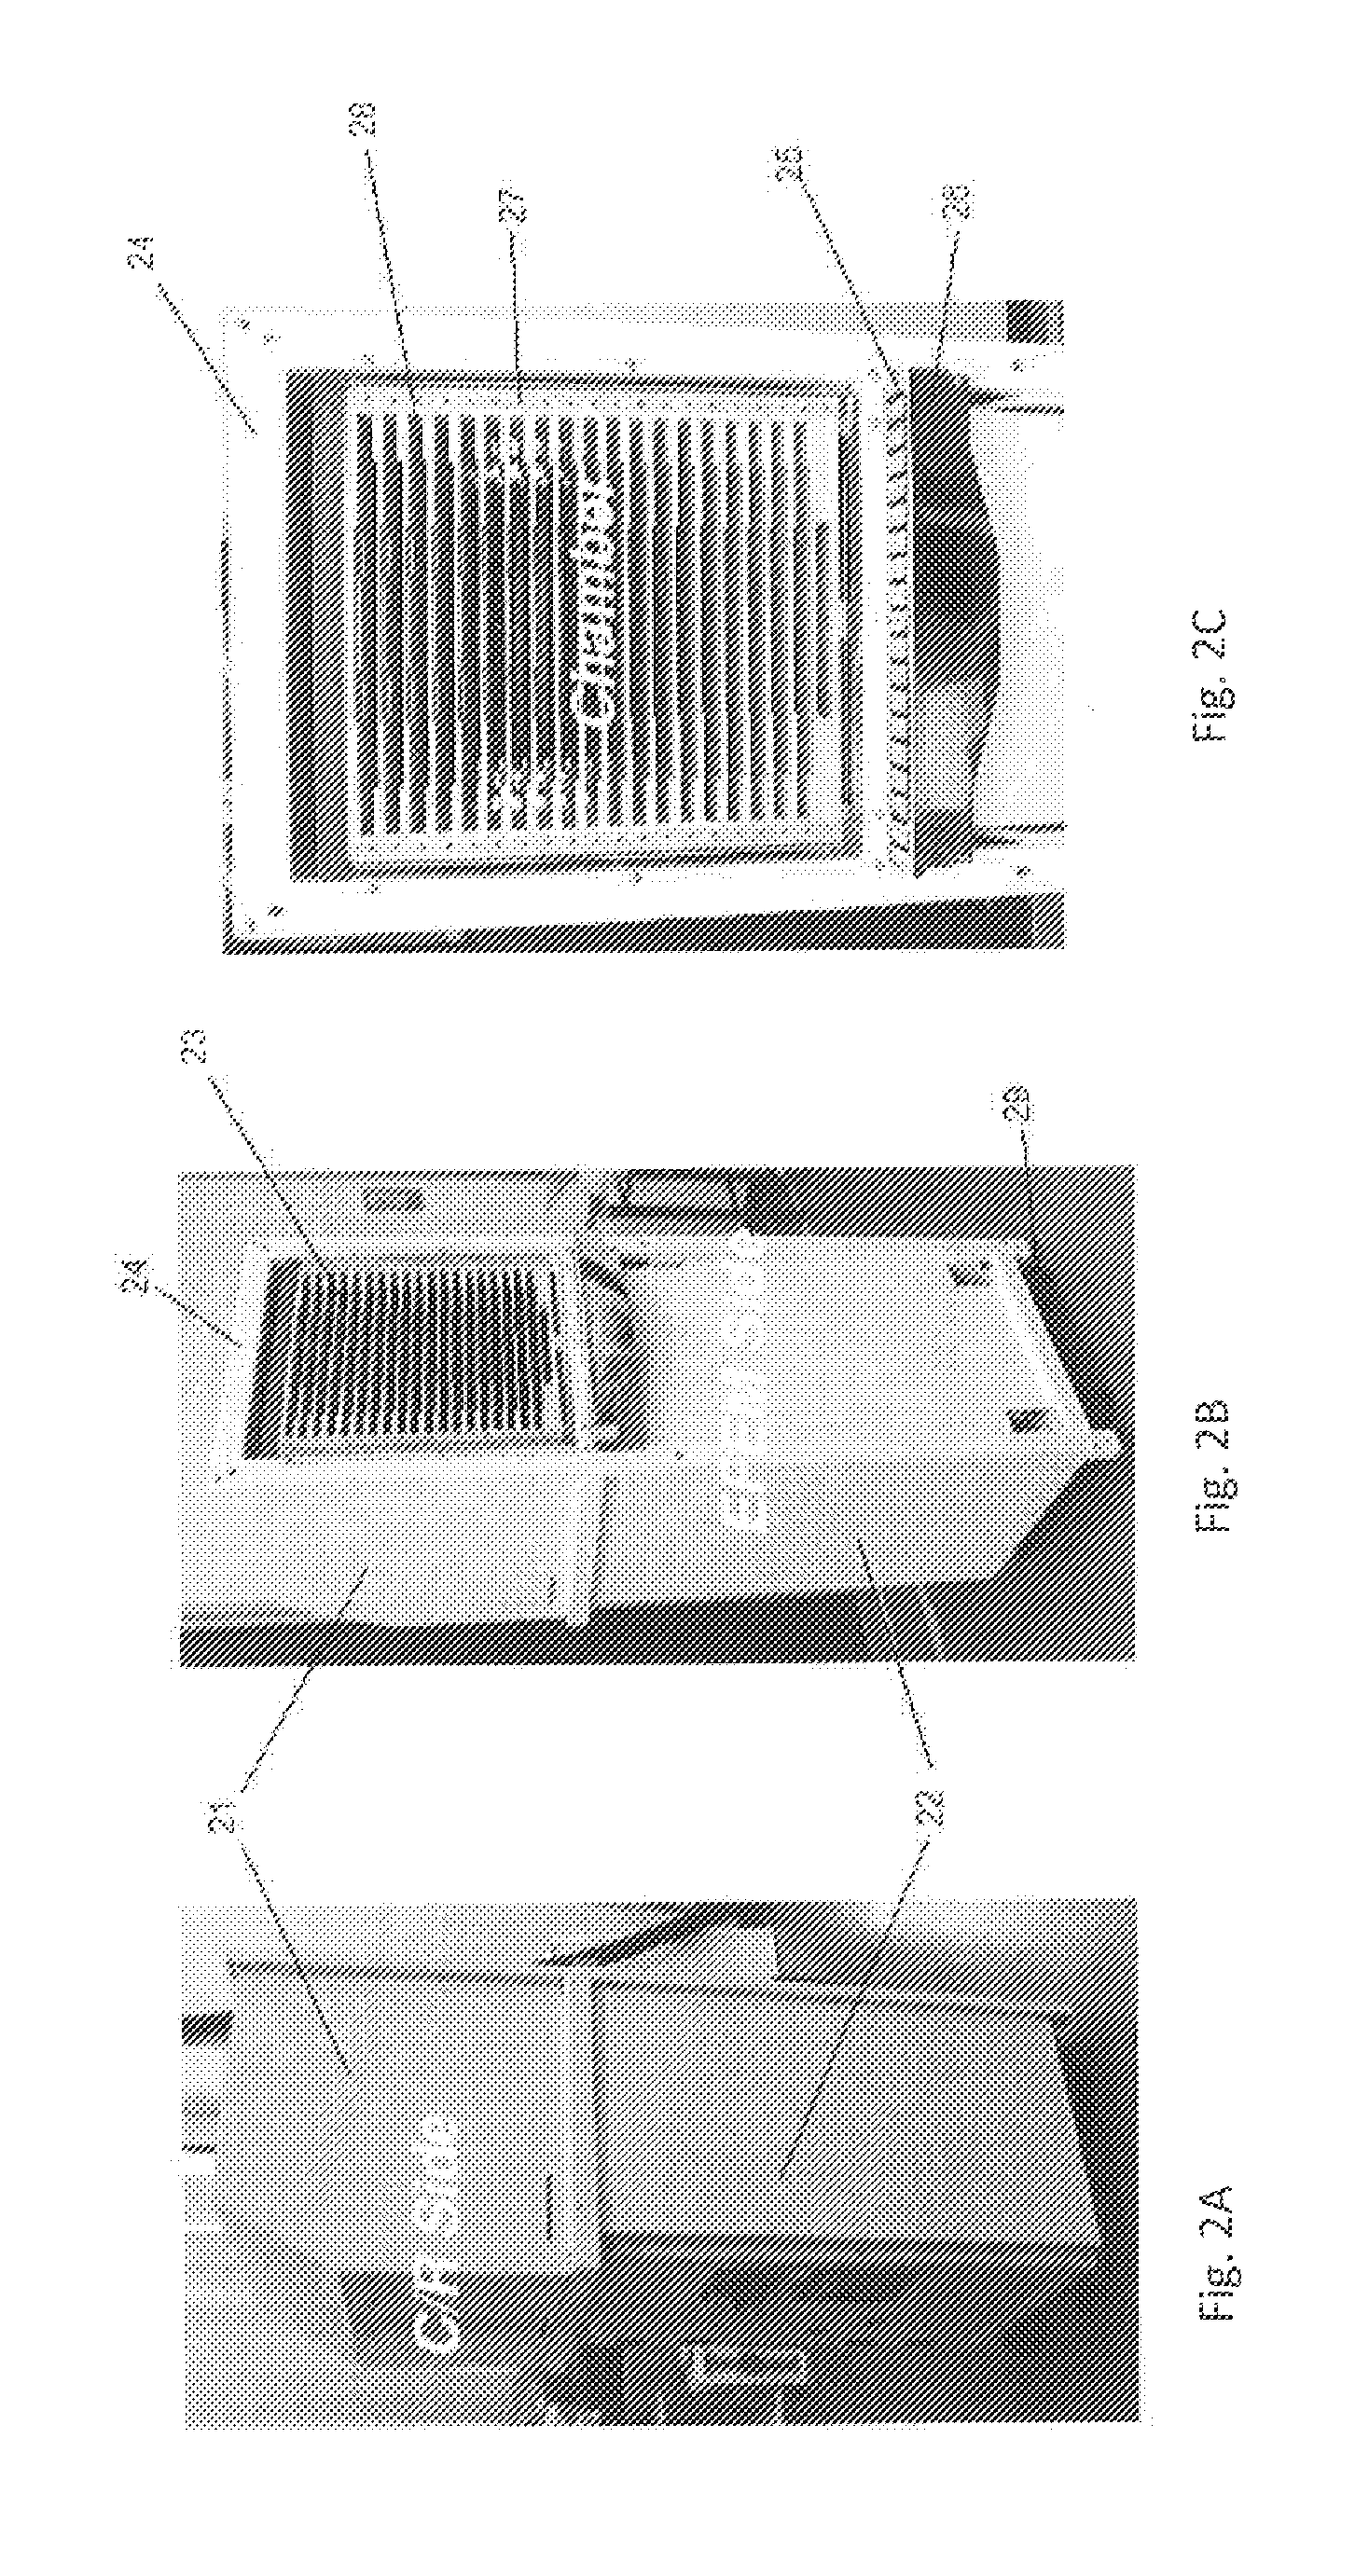 Apparatus and Method for Pre-Baking Substrate Upstream of Process Chamber